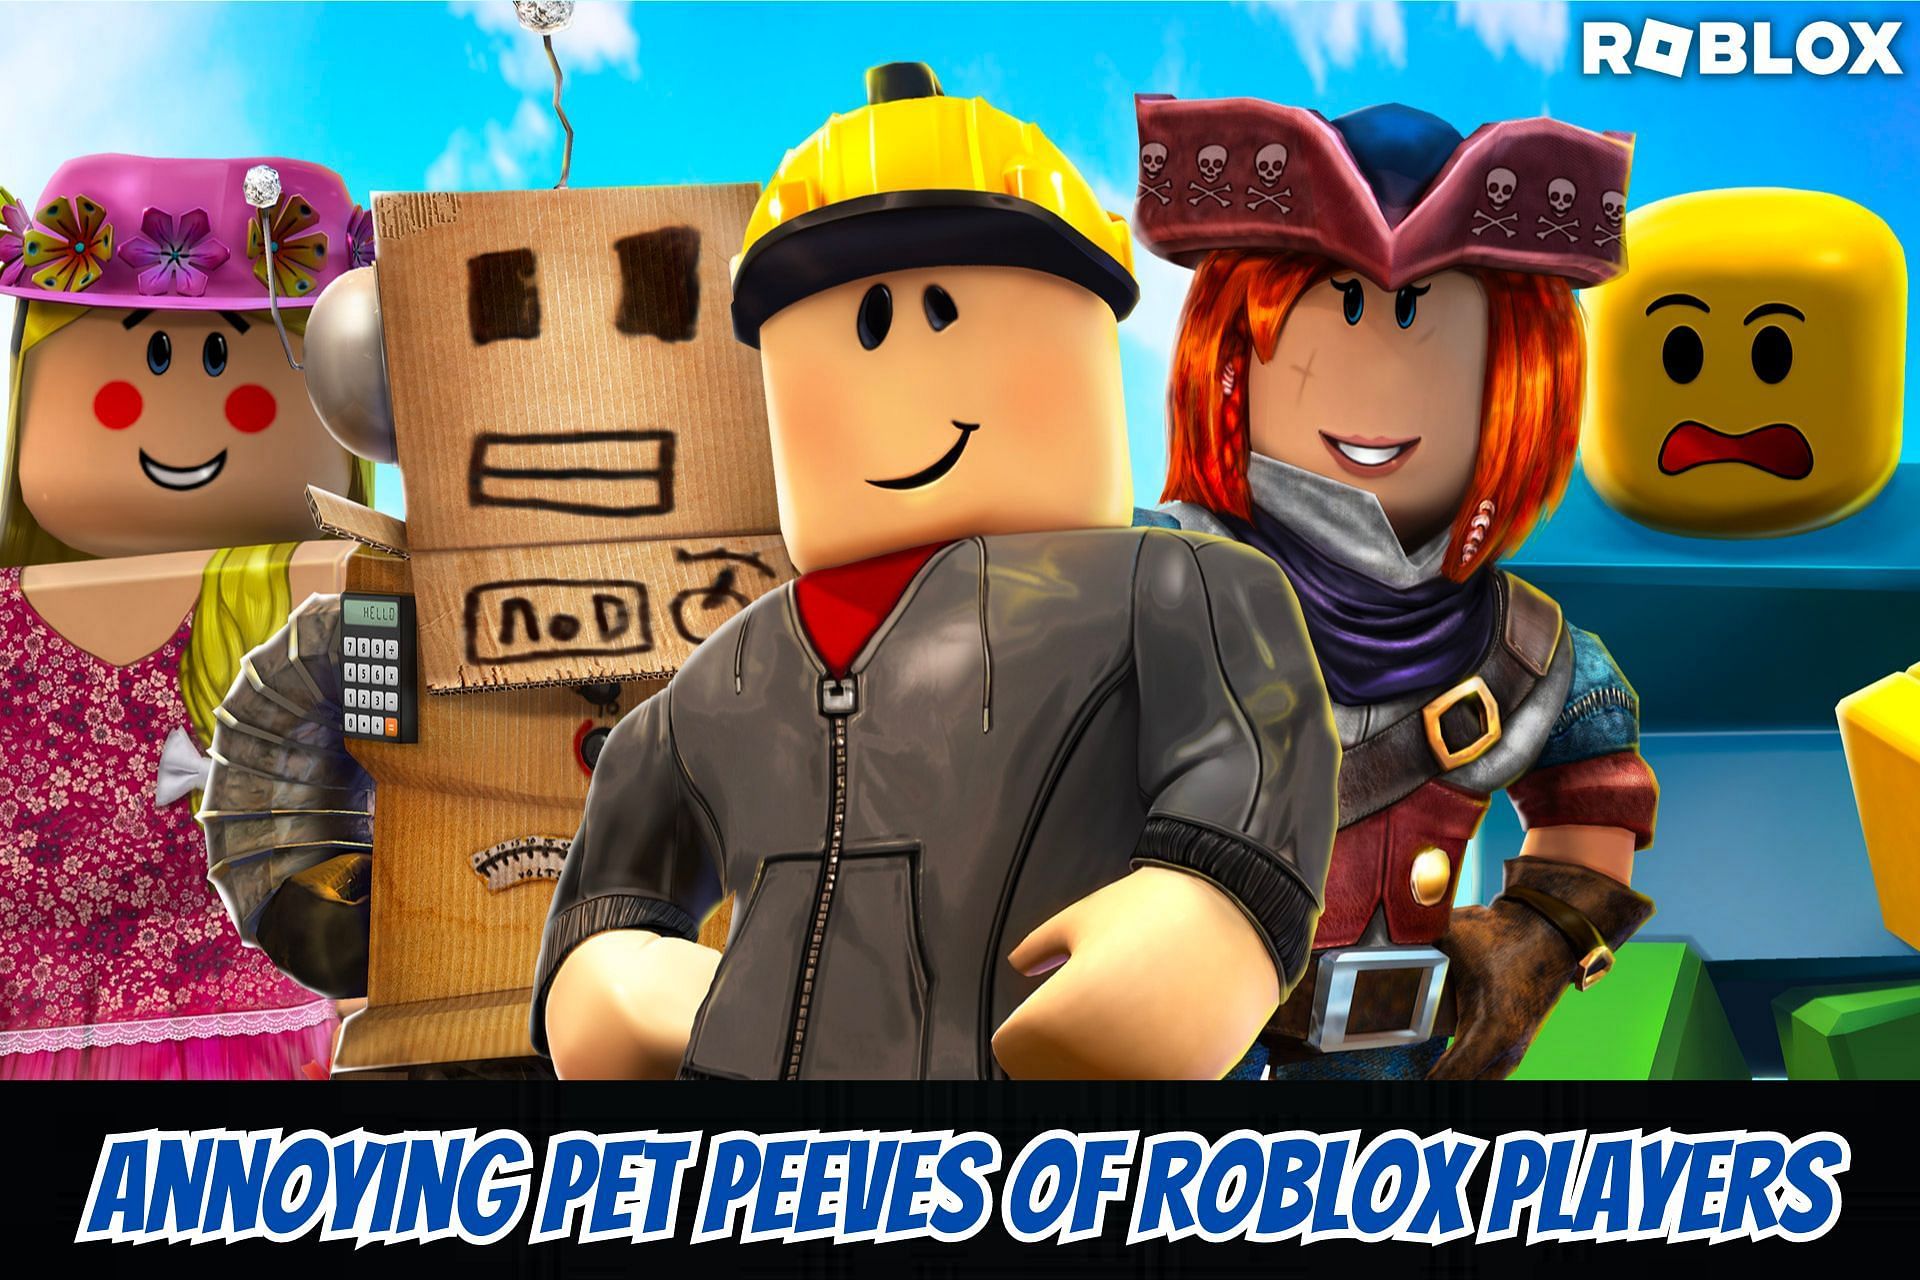 ANNOYING GUESTS IN ROBLOX 